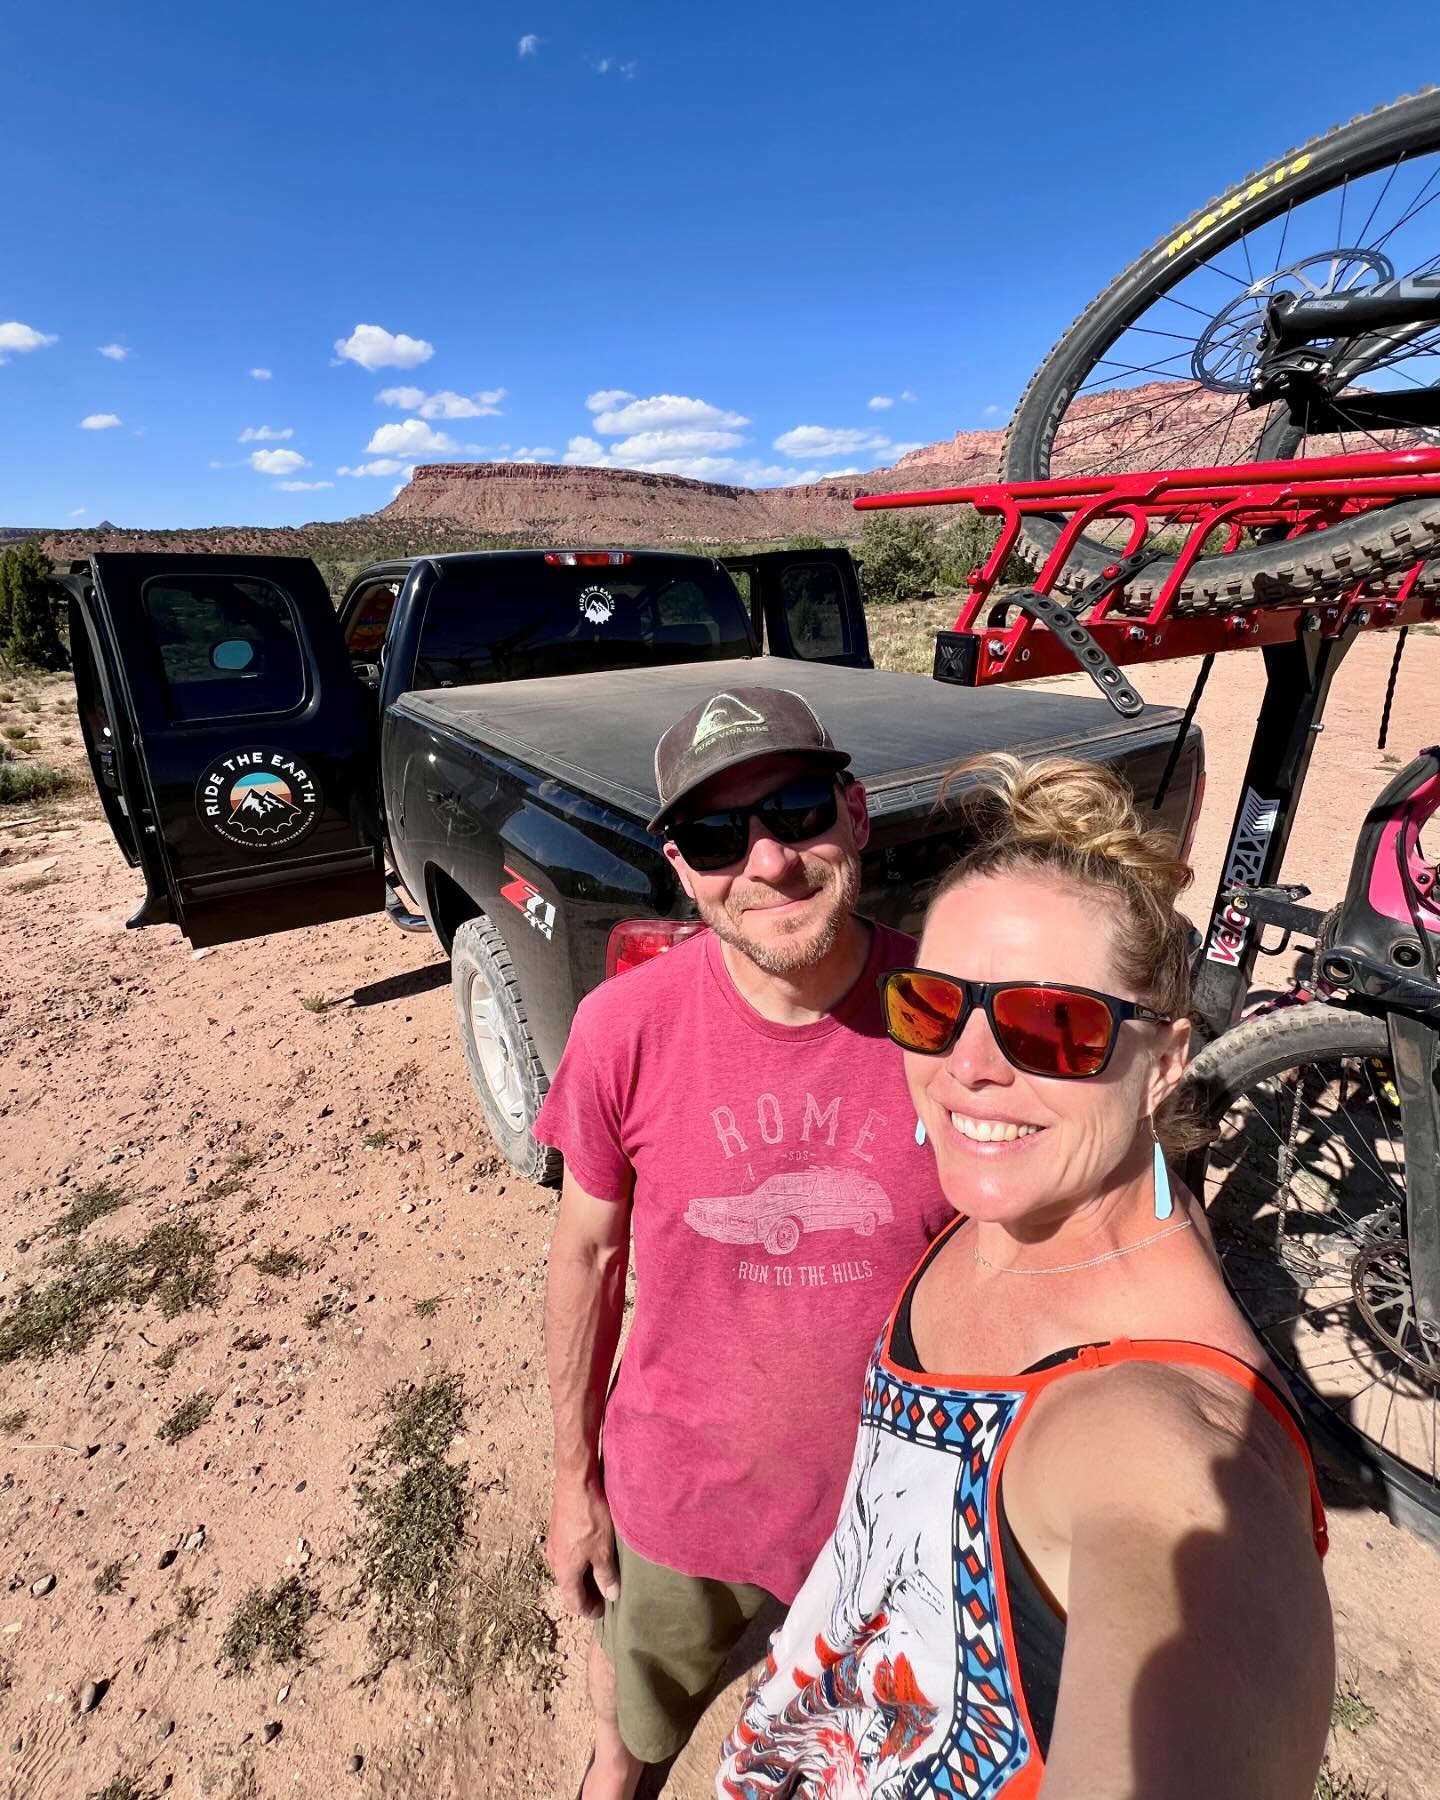 We just finished up an excellent spring season in southern Utah. Still riding the high from the amazing vibes on our women&rsquo;s MTB retreats.✨🙌✨ Two weeks with a couple rad groups! We also explored the trails, caught up with friends, and are now 